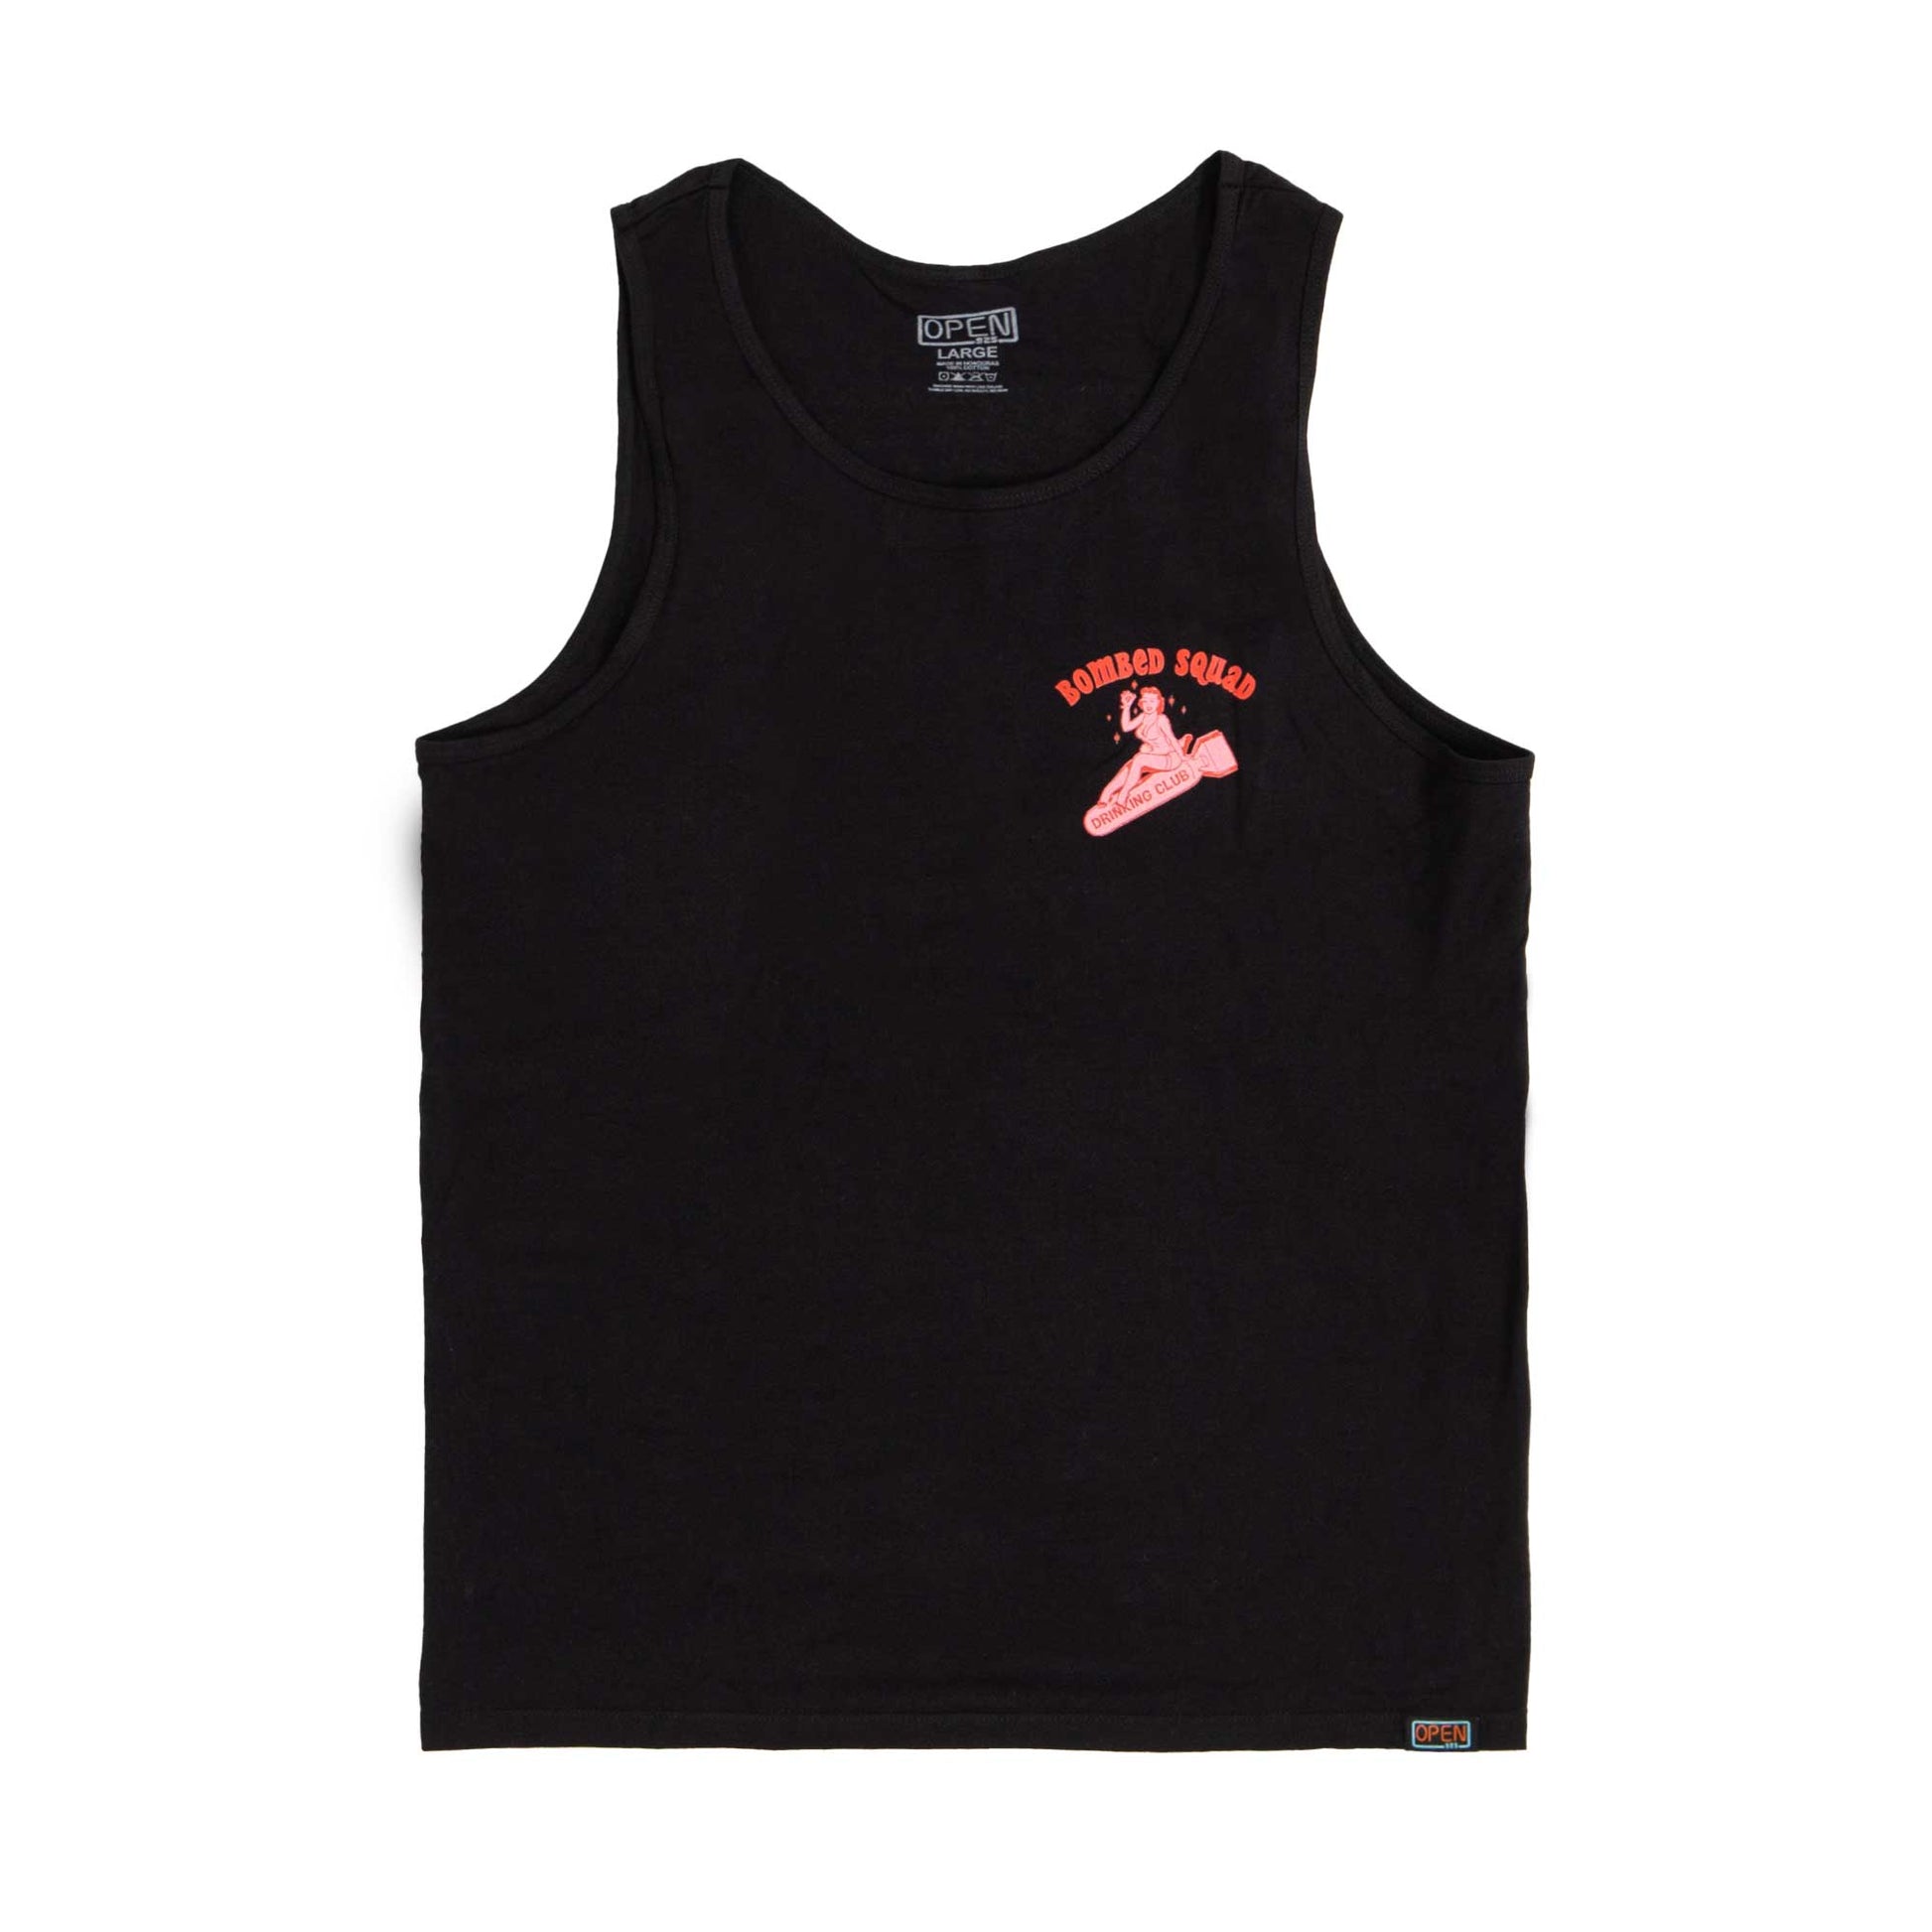 Bombed Squad Tank Top Black | Open925 – Open 925